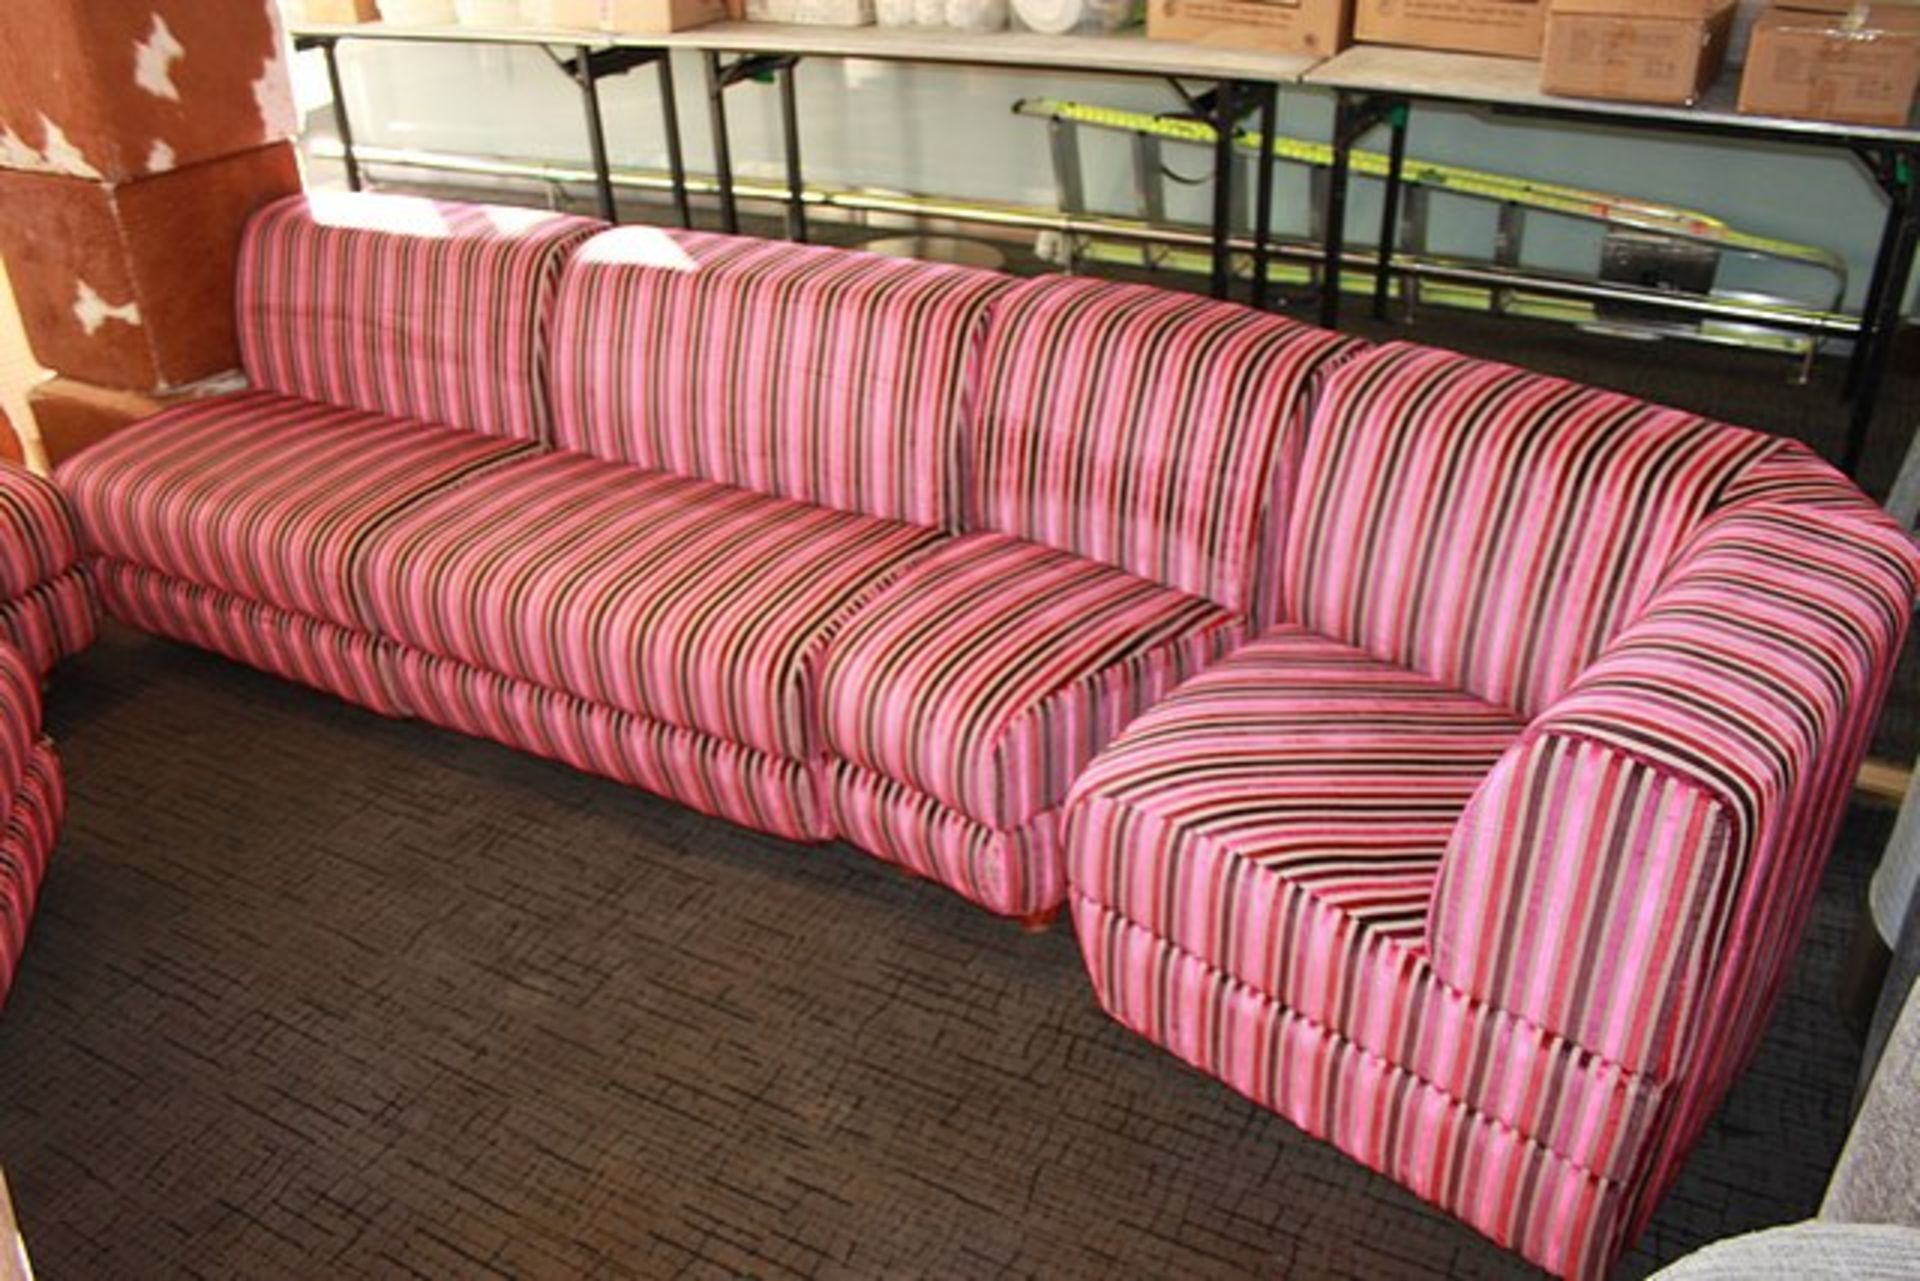 Sectional sofa comprising six pieces upholstered in a pink stipe material spans approximately 4m